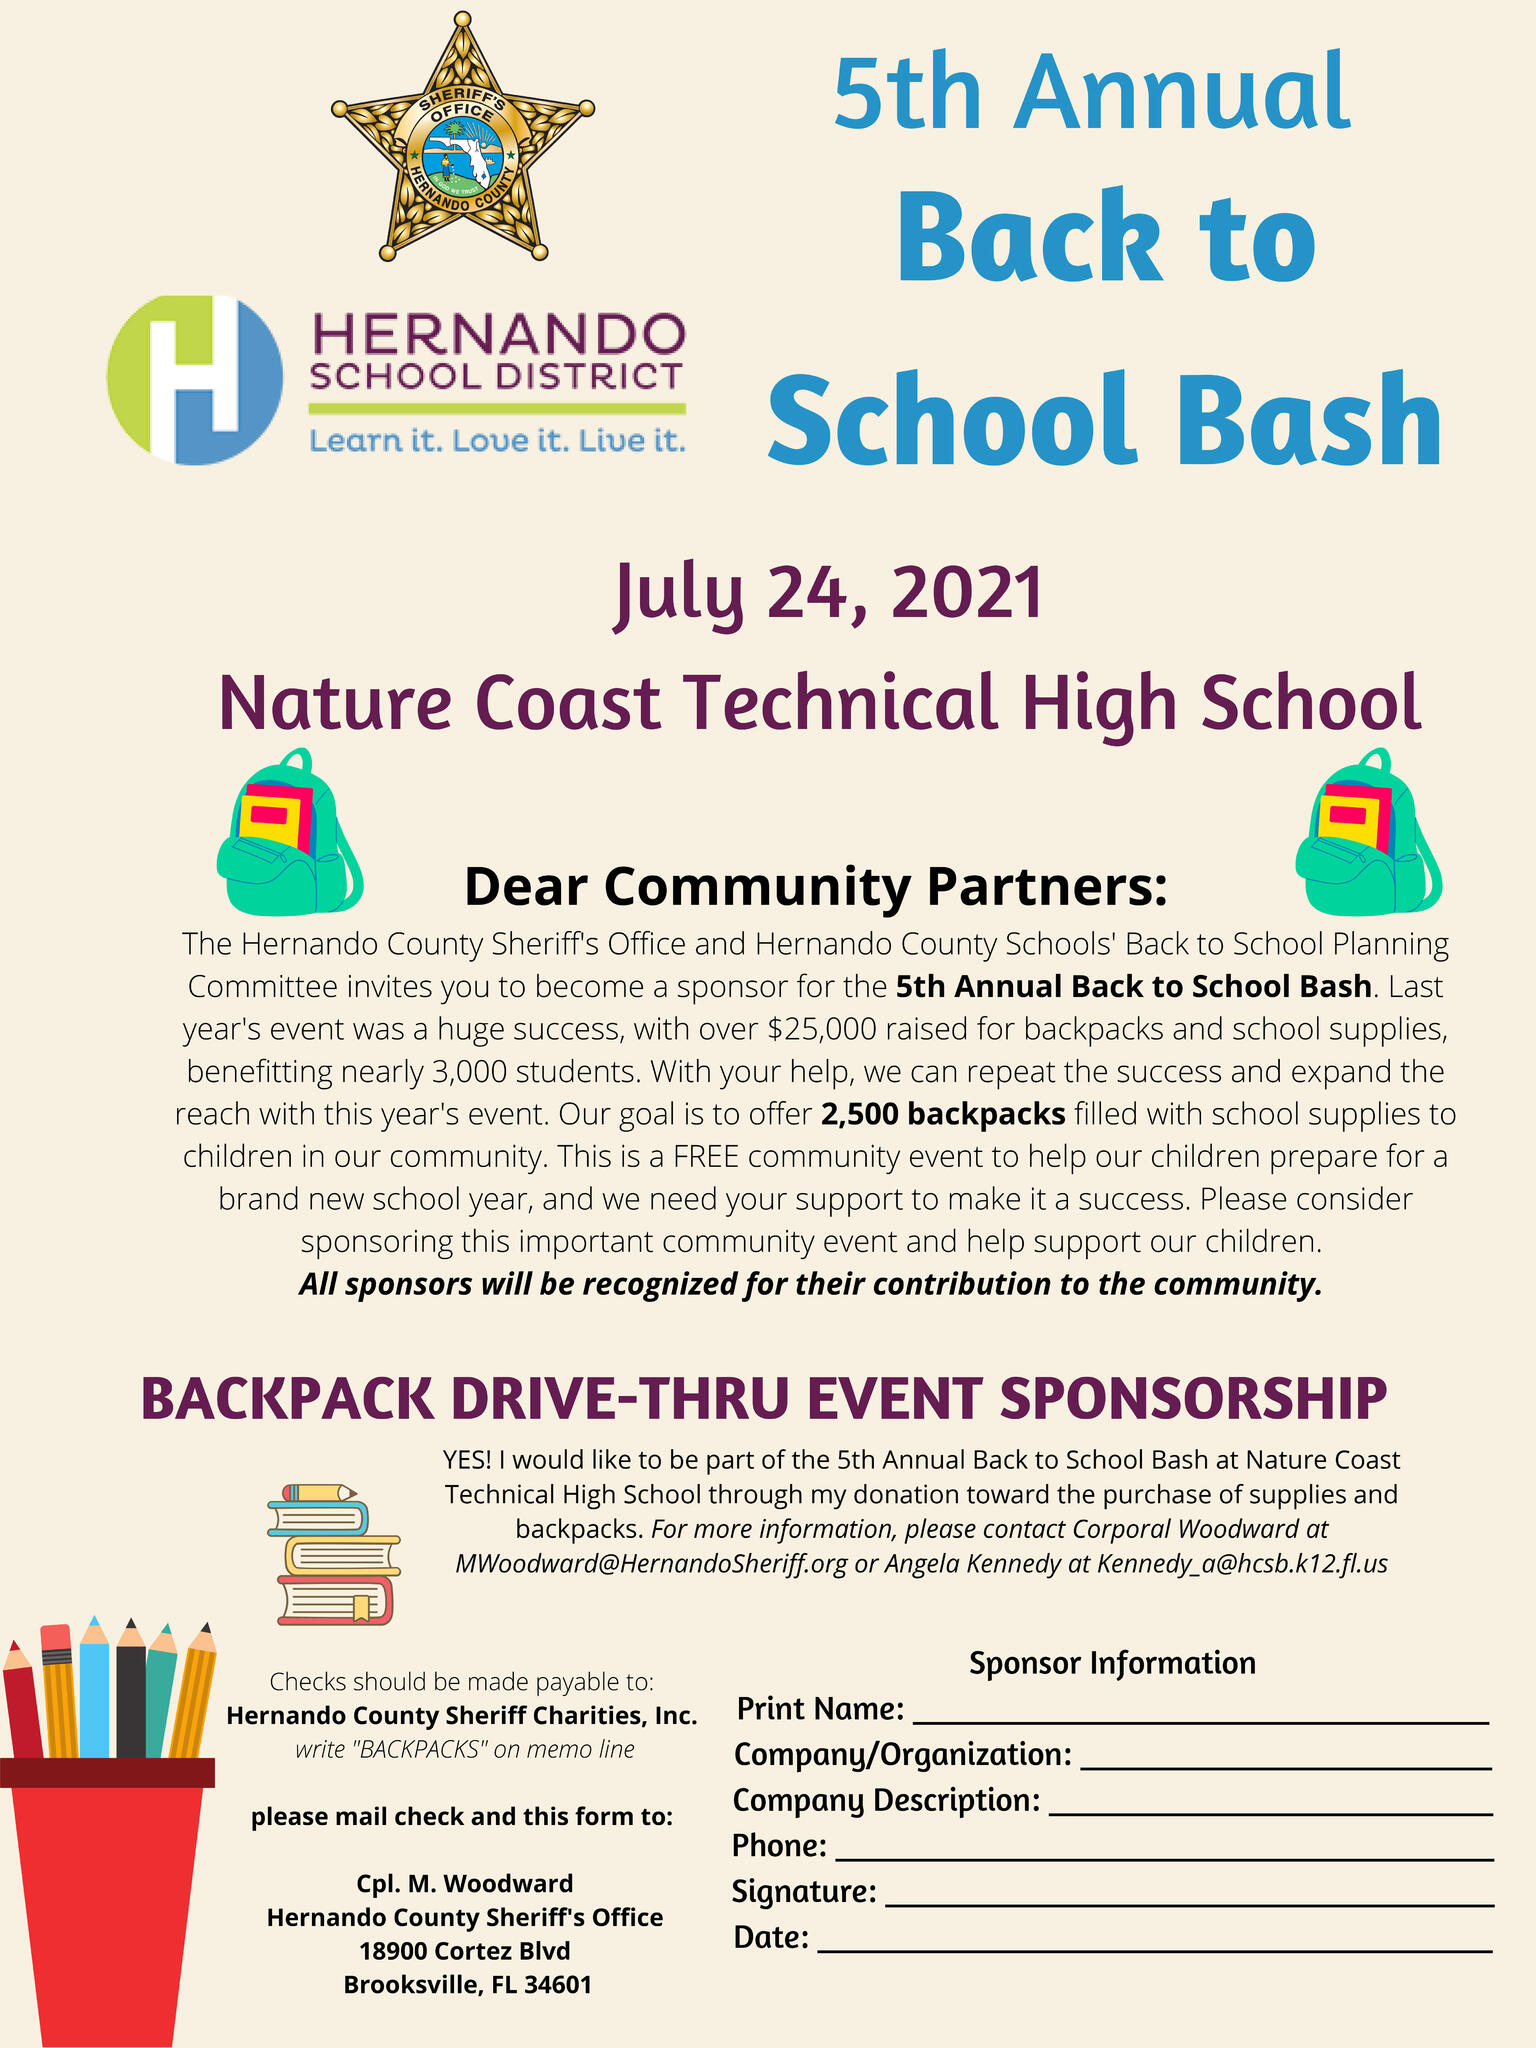 2021 Back to School Bash Sponsored by the Hernando County Sheriff's